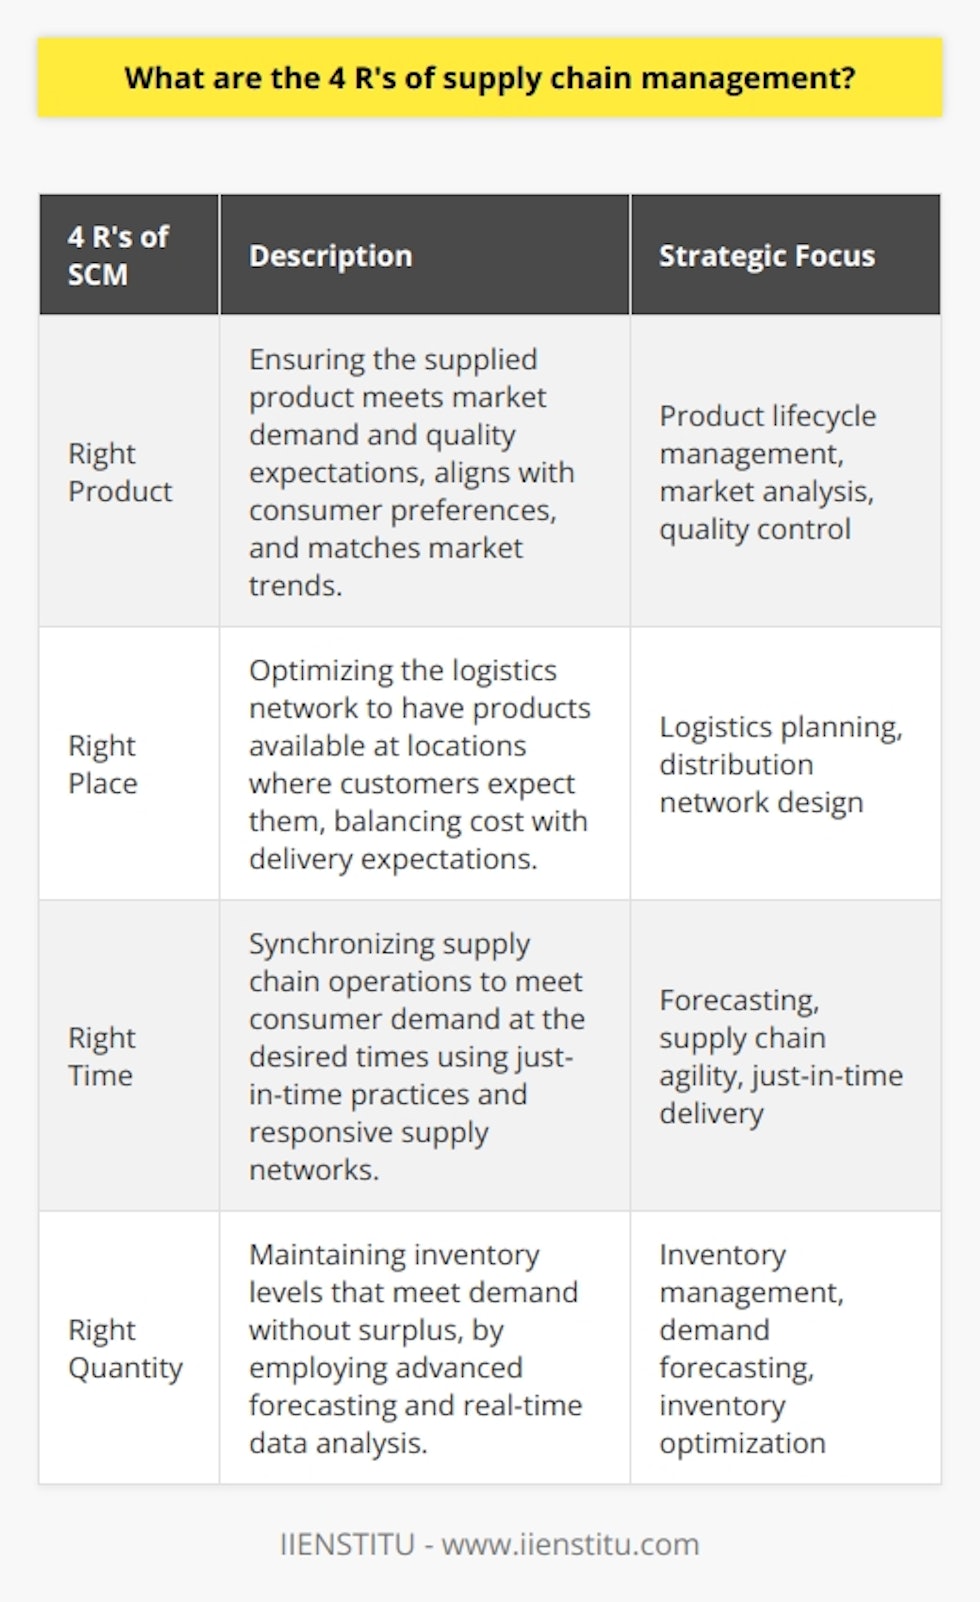 Supply Chain Management (SCM) plays a pivotal role in meeting the demands of today's global market. The concept of the 4 R's—right product, right place, right time, right quantity—is integral to mastering the art of SCM. These principles act as the cornerstones of a successful supply chain framework, ensuring that the delivery of goods is executed with precision and efficiency.Right ProductIn SCM, delivering the right product is elemental. This entails understanding the market demands and focusing on product quality. A product that aligns with consumer expectations and market trends will likely yield better satisfaction and fewer returns. It also implies that the product life cycle is monitored effectively, ensuring that new products are launched at the right moment and obsolete products are discontinued in a timely manner.Right PlaceStrategically positioning inventory is the essence of the right place principle. This concept revolves around optimizing the logistics network so that products are available at locations where consumers expect them to be. For instance, faster-moving items might be placed in easily accessible distribution centers closer to the consumer base, while slower-moving stock might be centralized to reduce holding costs. The goal is to balance the costs of distribution with the need for rapid delivery to the customer.Right TimeThe element of time in SCM is a delicate balance that requires just-in-time practices to reduce waste and avoid excess inventory. The right time speaks to the synchronization of supply chain operations to ensure that products are available to customers when they want them. This requires diligent forecasting, responsive supply networks, and agile logistics strategies that can adapt to changes in demand quickly.Right QuantityAchieving the right quantity means striking the perfect balance between supply and demand. Under this principle, effective inventory management protocols are employed to ensure there is never too much or too little stock on hand. This involves leveraging complex forecasting tools, inventory optimization models, and real-time data analytics to predict consumer demands accurately and manage inventory levels, thus avoiding stockouts that can lead to lost sales and overstock situations that tie up capital.In conclusion, the four R's of supply chain management serve as a guiding framework for delivering customer satisfaction and driving business efficiency. By focusing on providing the right product, in the right place, at the right time, and in the right quantity, companies can optimize their supply chains and thrive in the competitive landscape. Mastery of these principles allows businesses to minimize costs, enhance service levels, and react promptly to the ever-evolving marketplace dynamics.